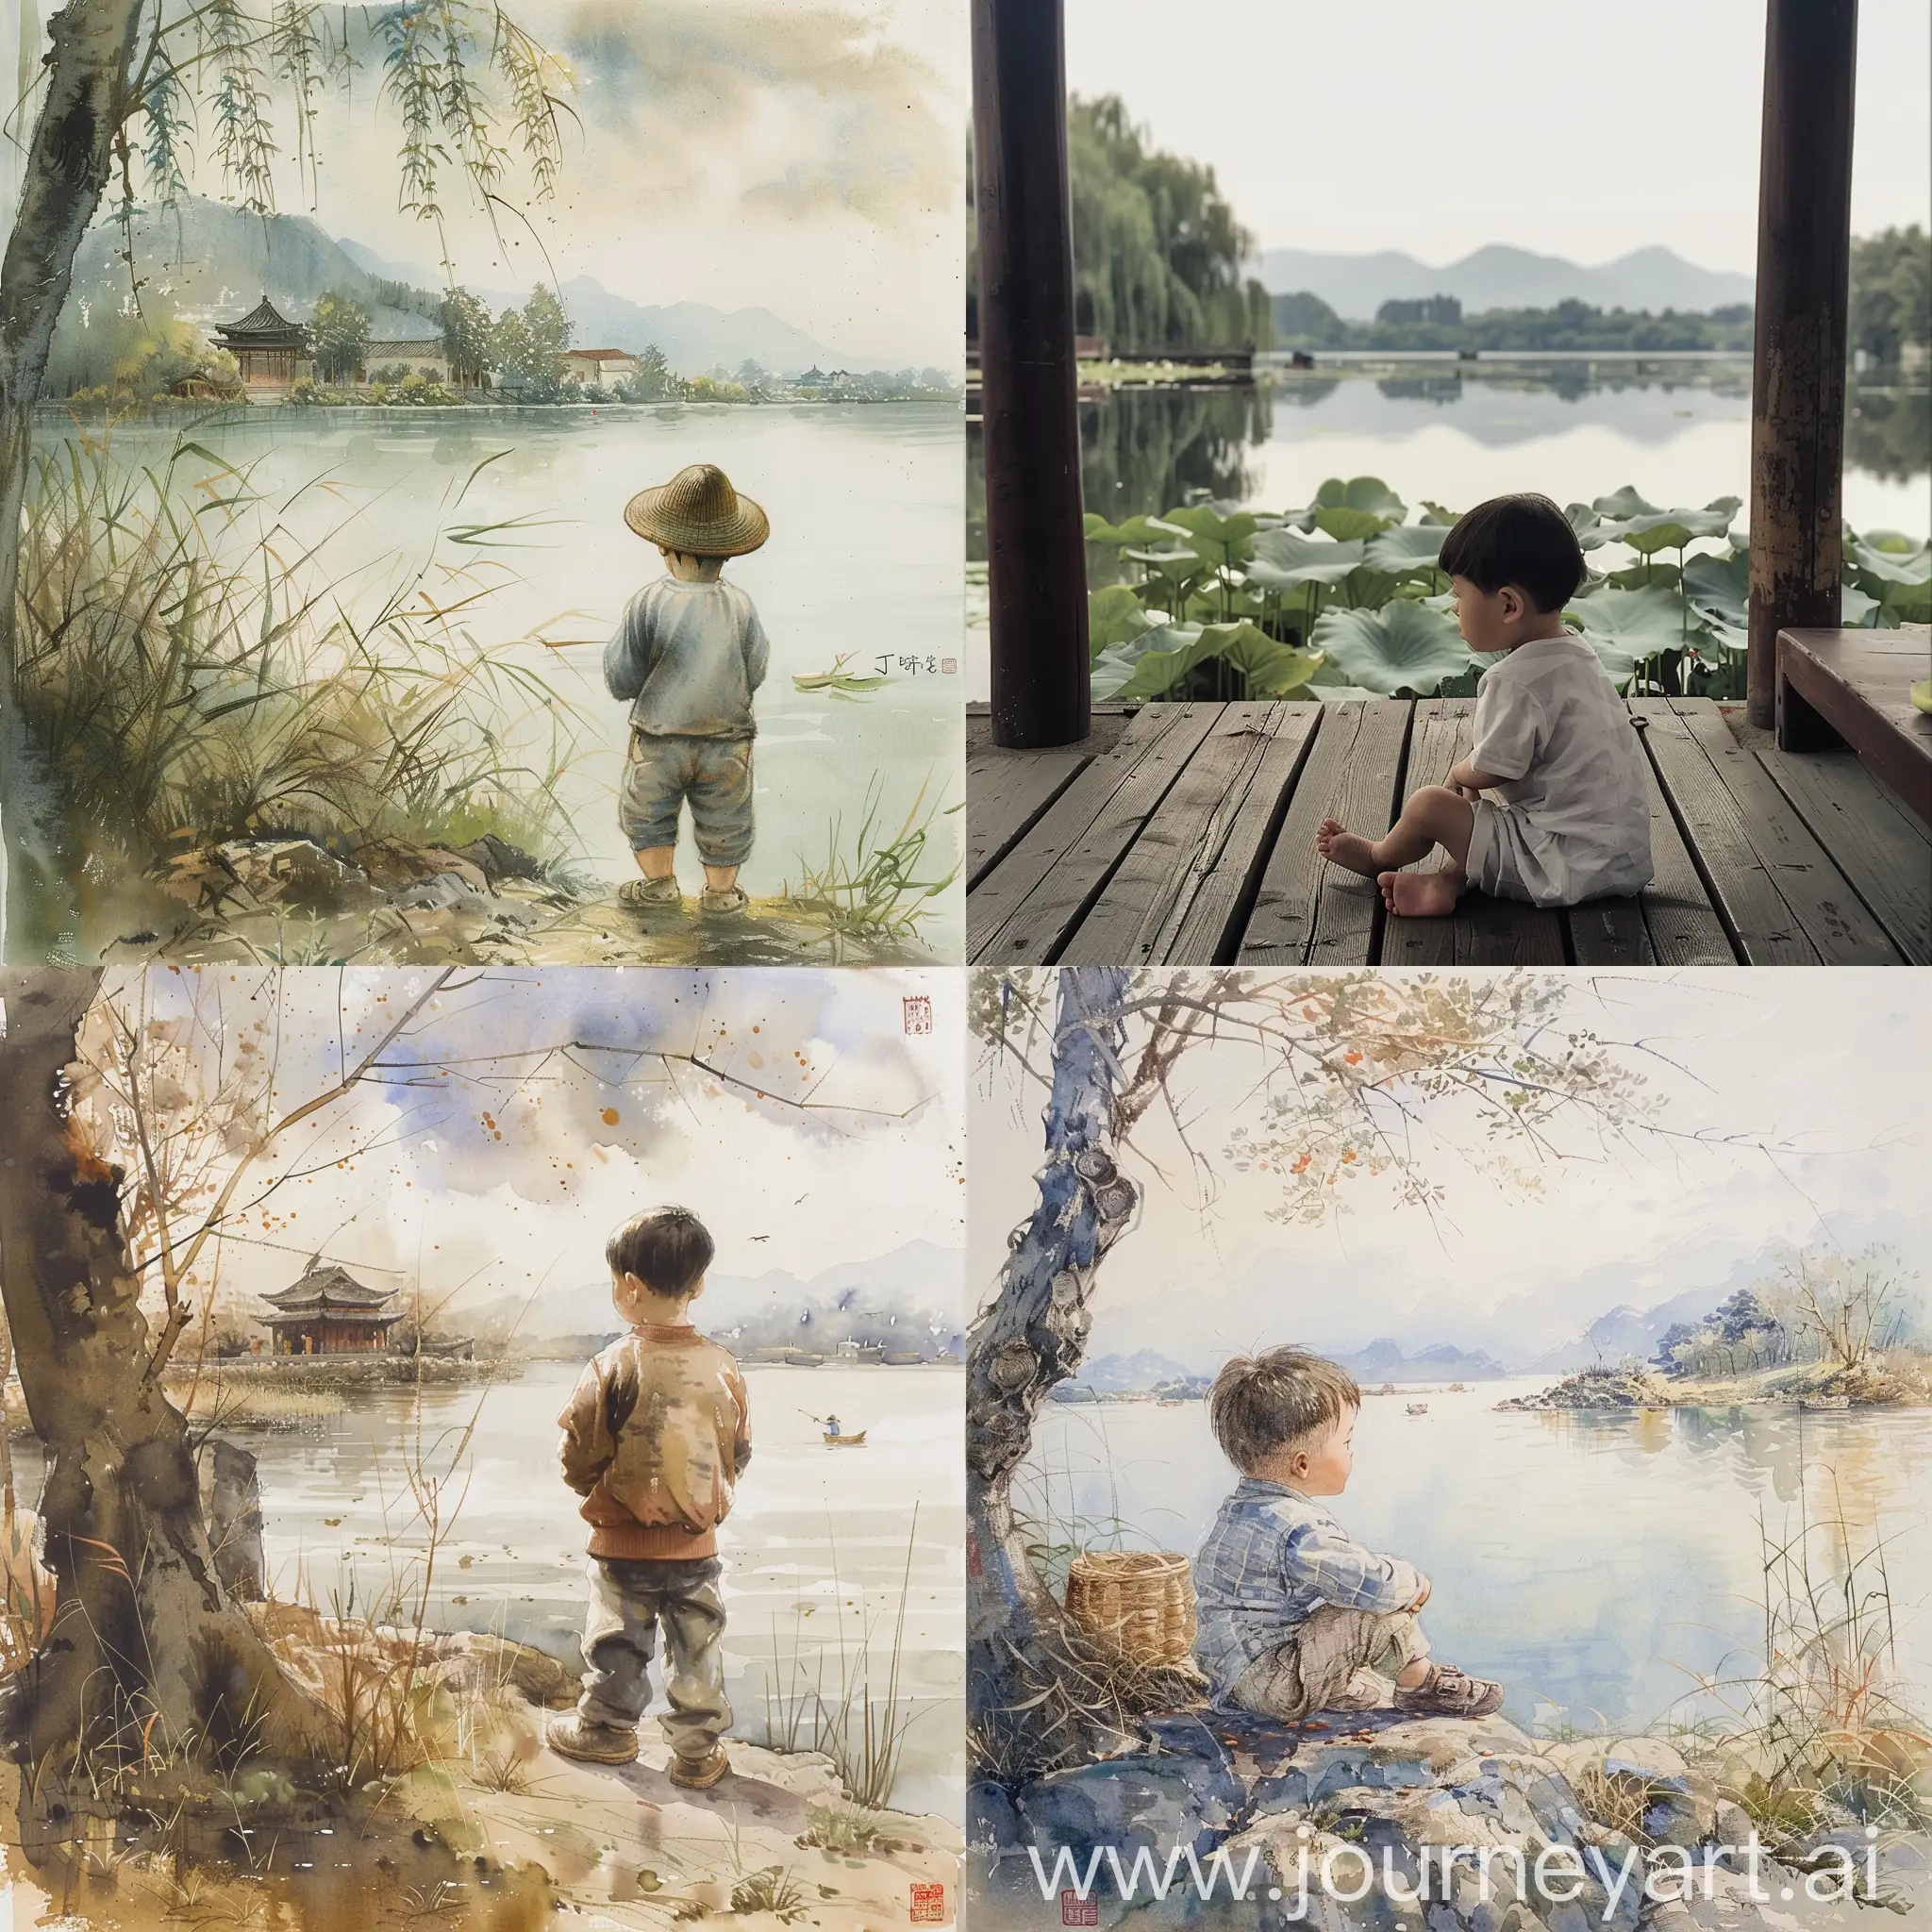 Little-Boy-by-West-Lake-Tranquil-Waterside-Scene-with-a-Child